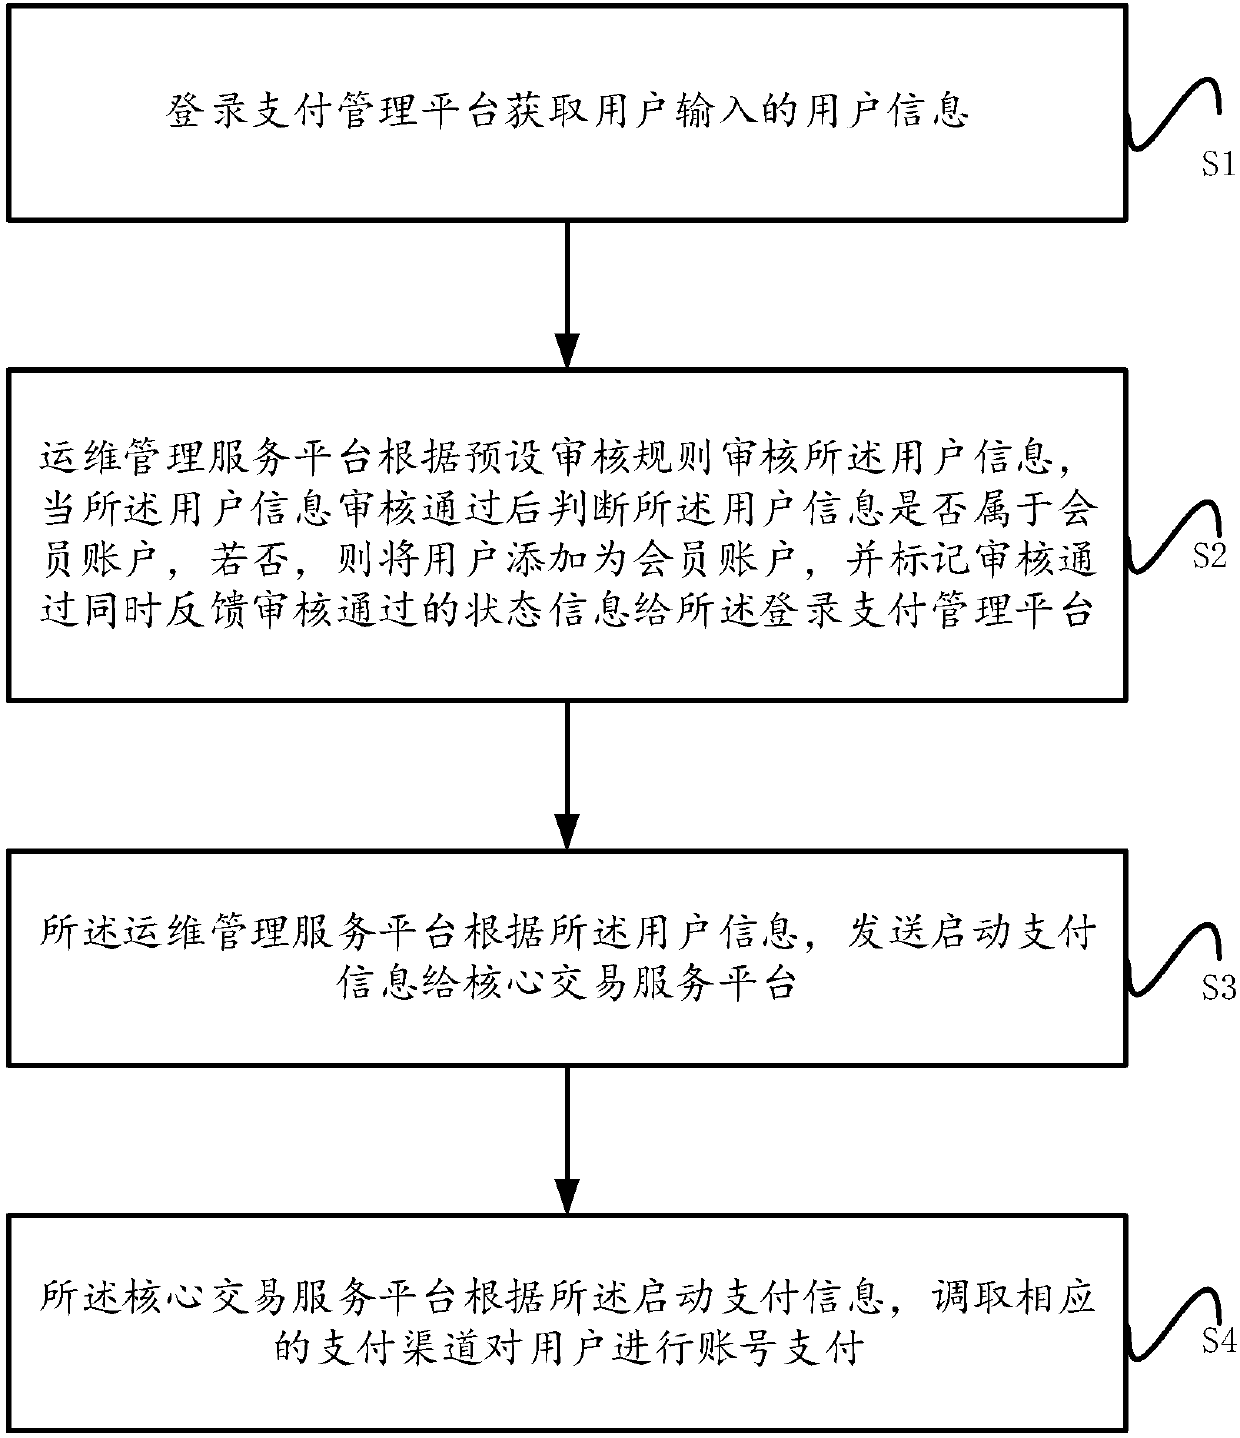 Mobile payment system and method for online and offline shopping malls